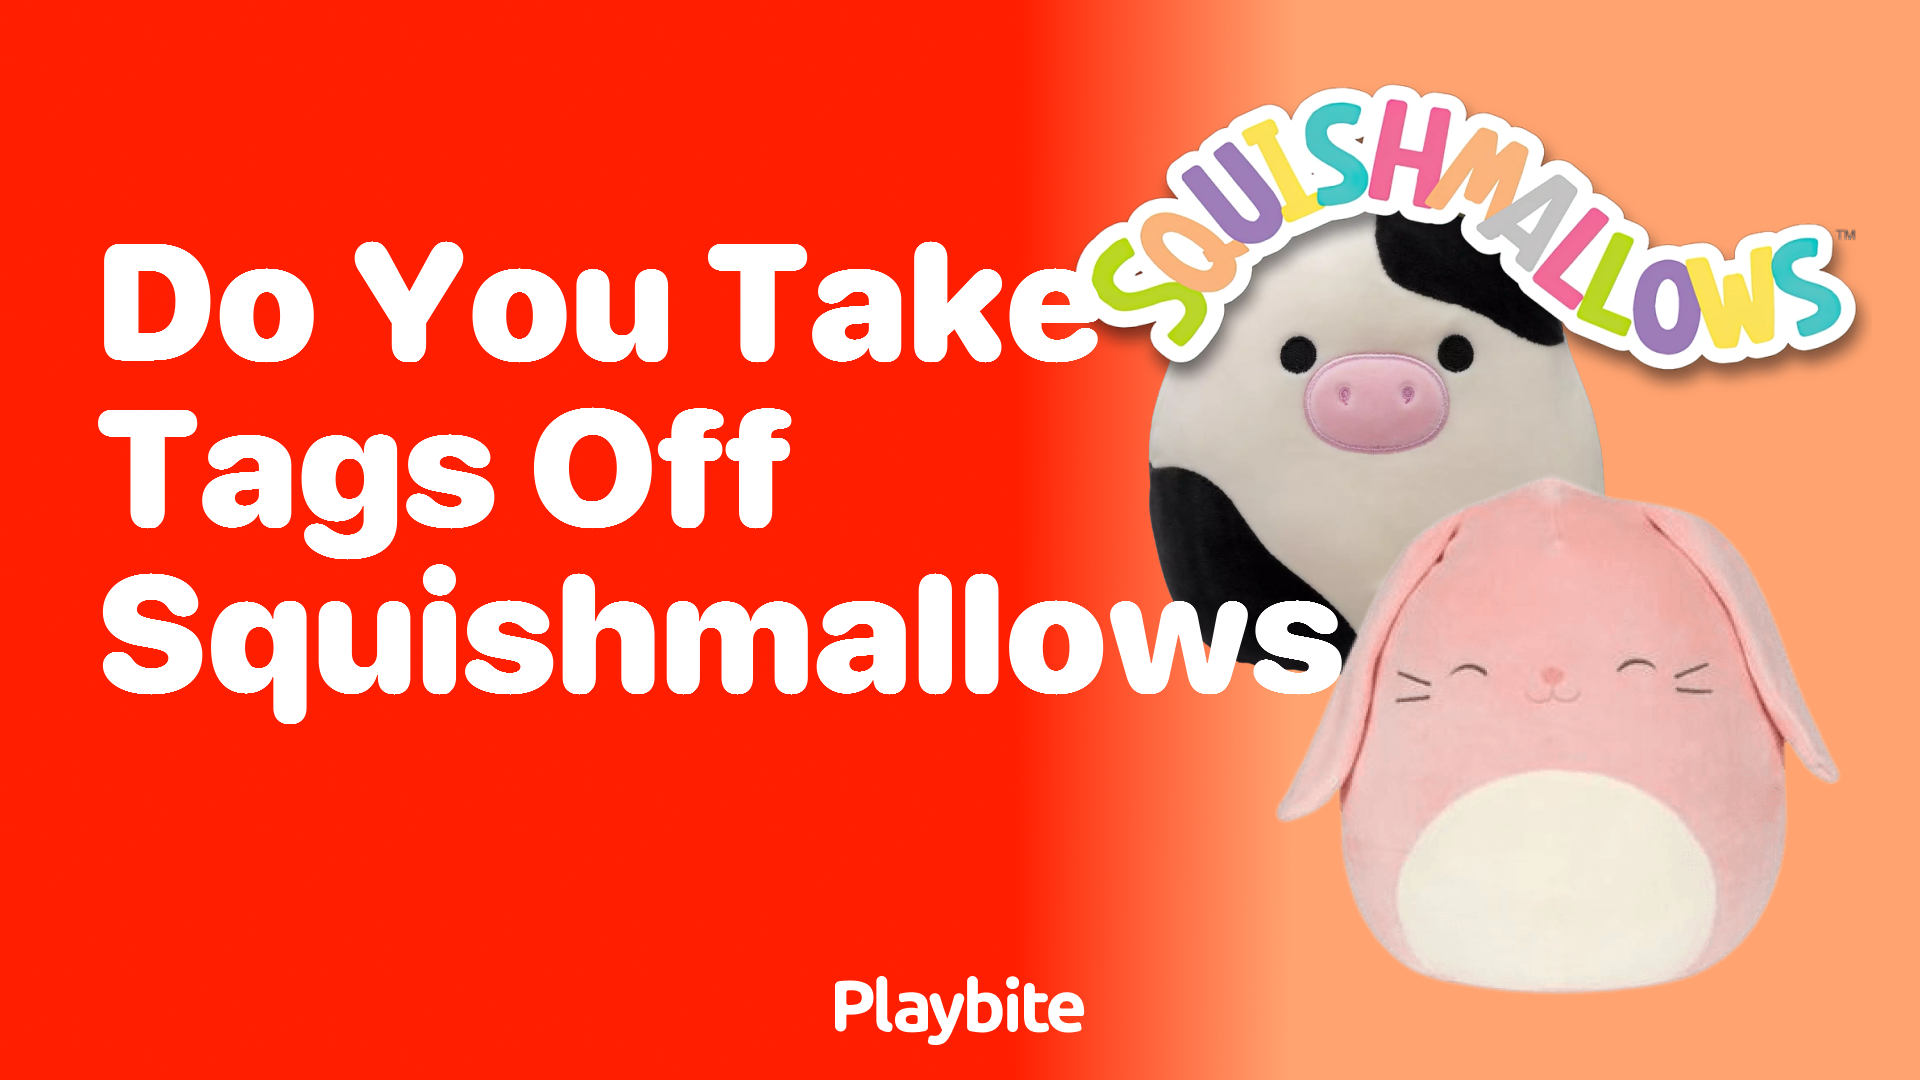 Do You Take Tags Off Squishmallows?